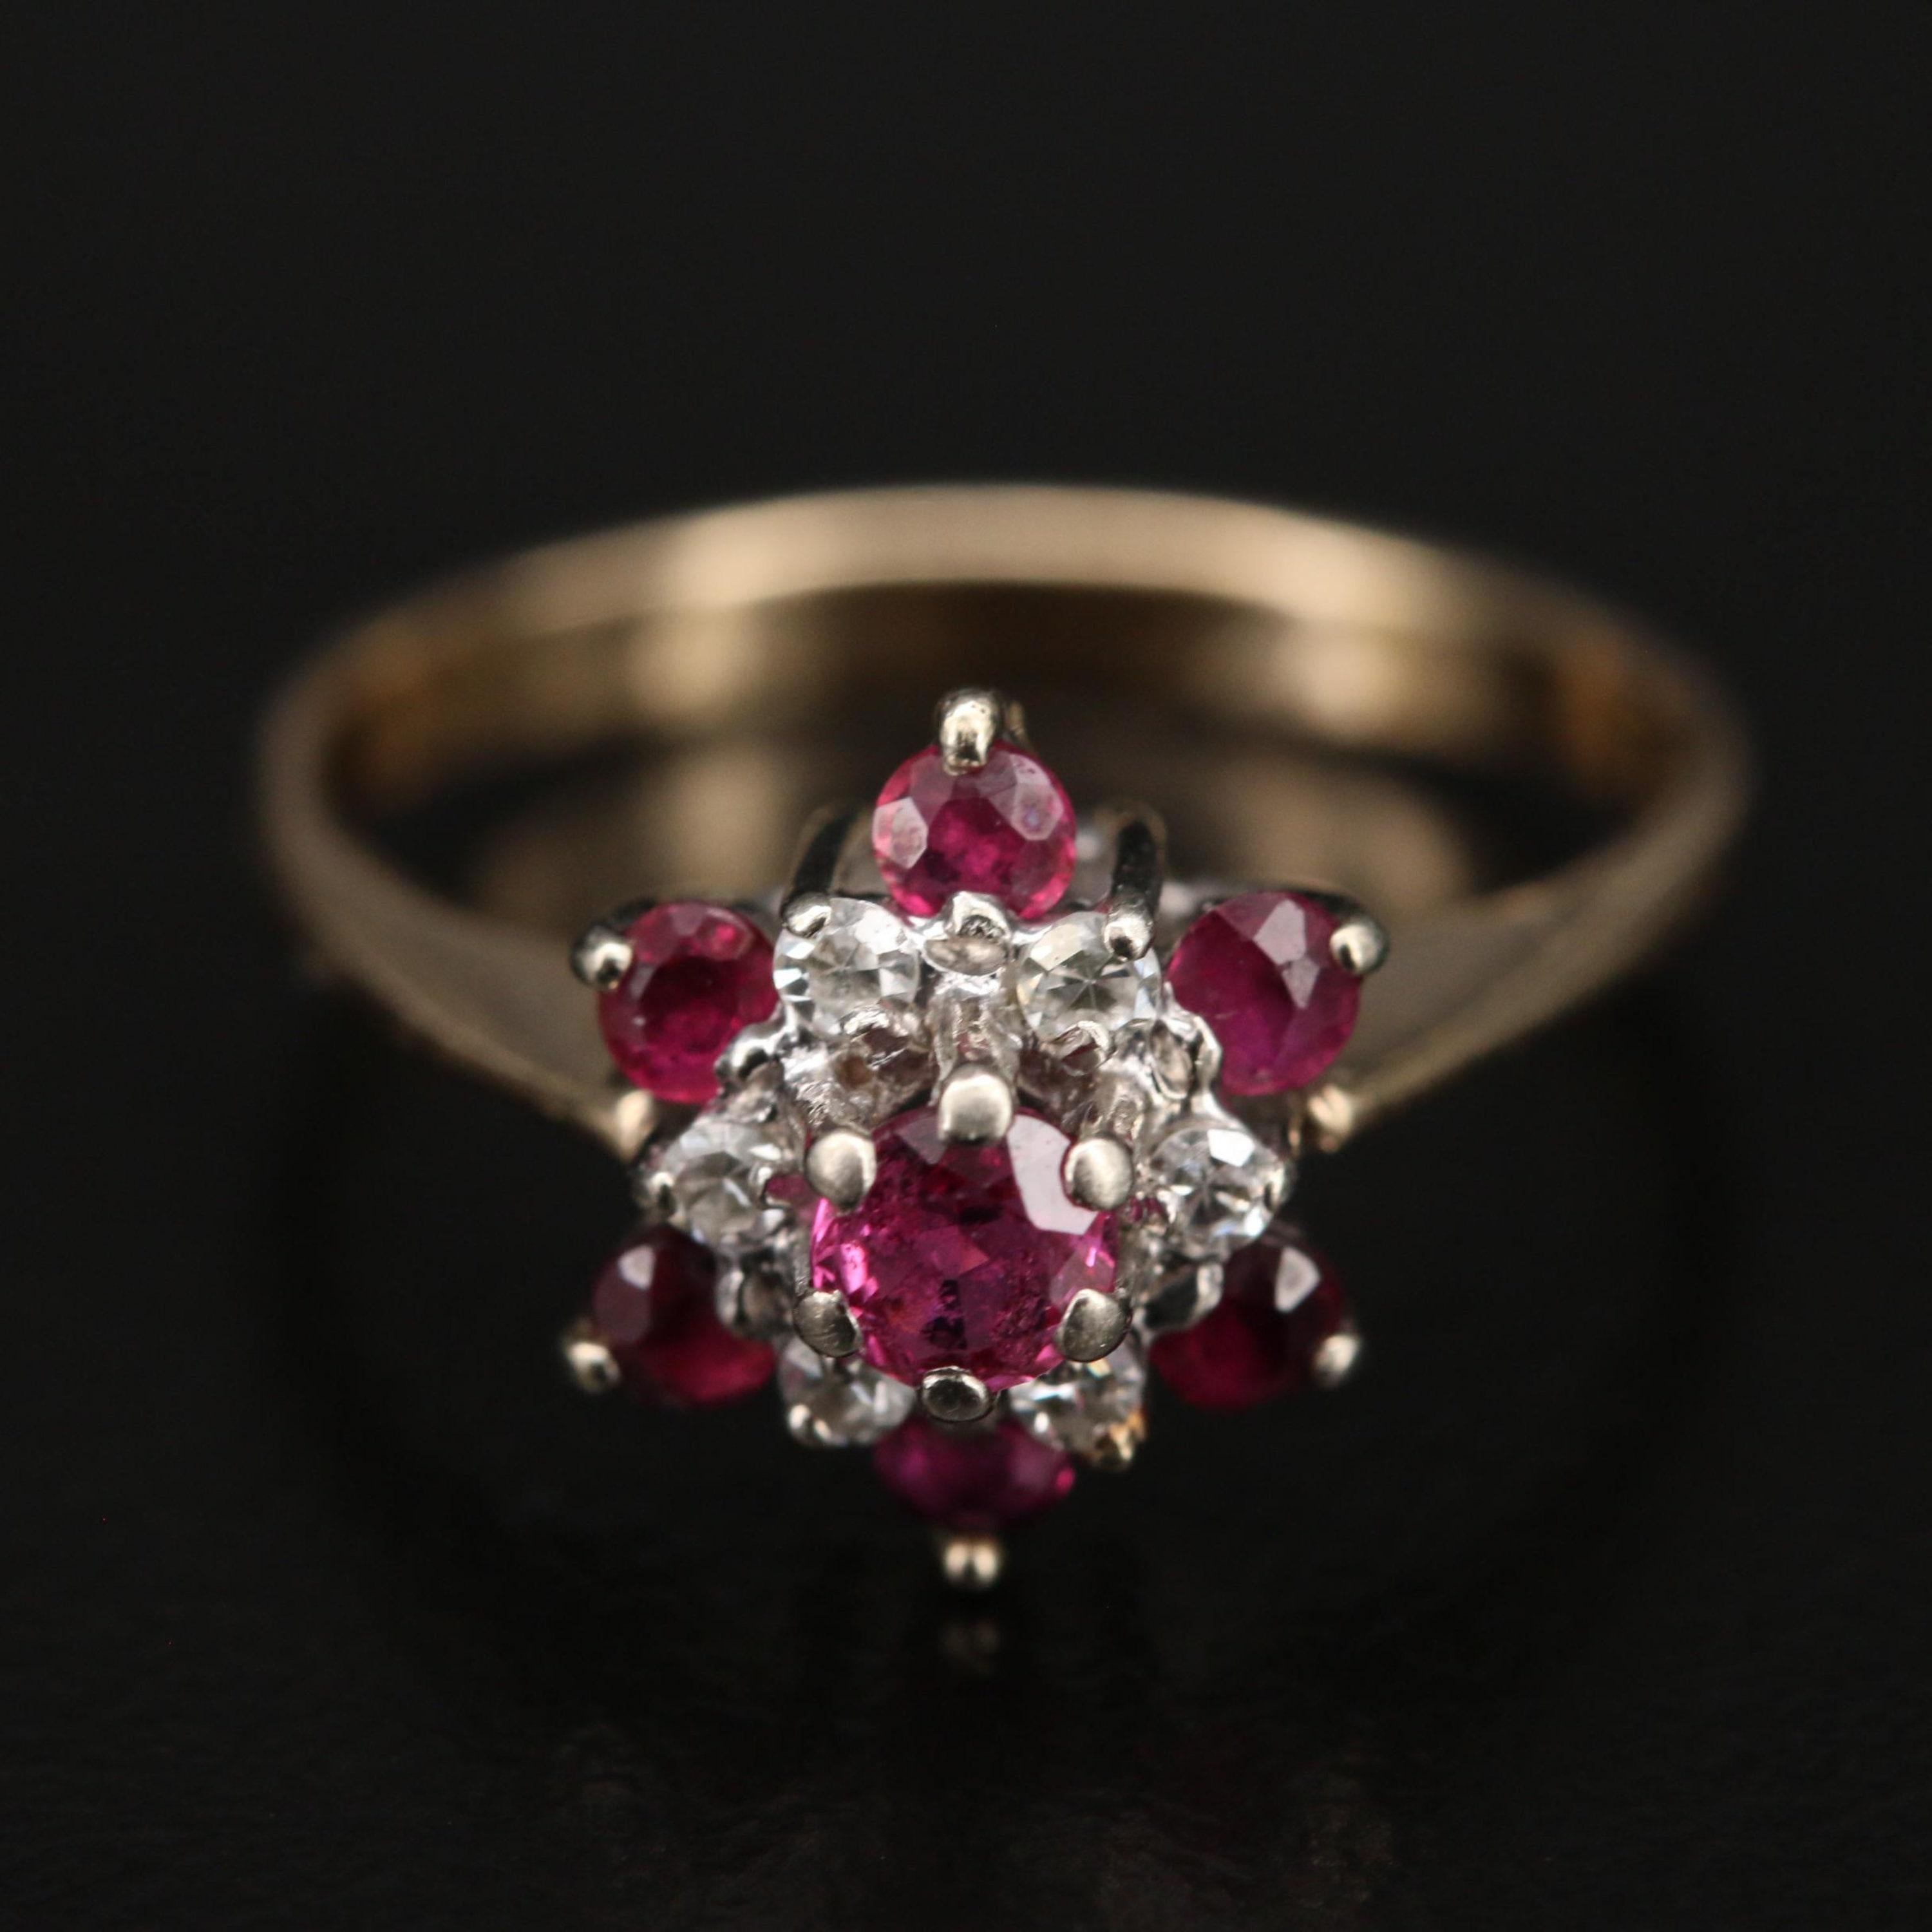 For Sale:  Antique Star Ruby Engagement Ring, Art Deco Floral Ruby Diamond Wedding Ring 7